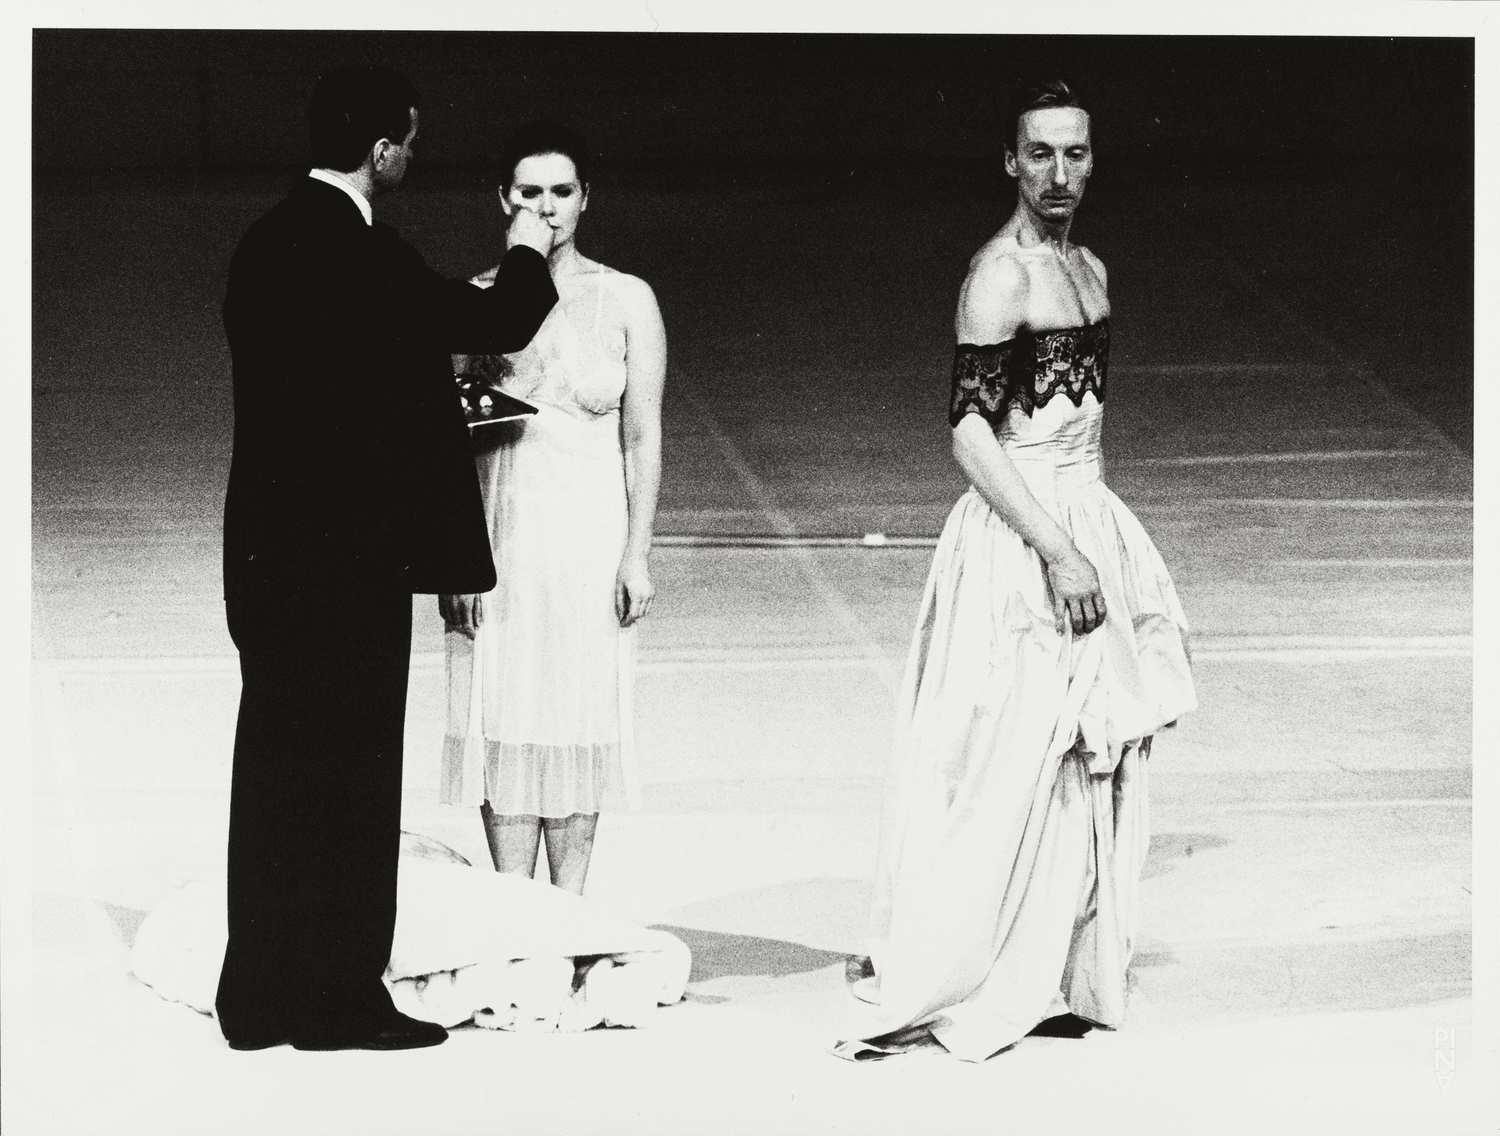 Jan Minařík, Dominique Mercy and Dominique Duszynski in “Two Cigarettes in the Dark” by Pina Bausch